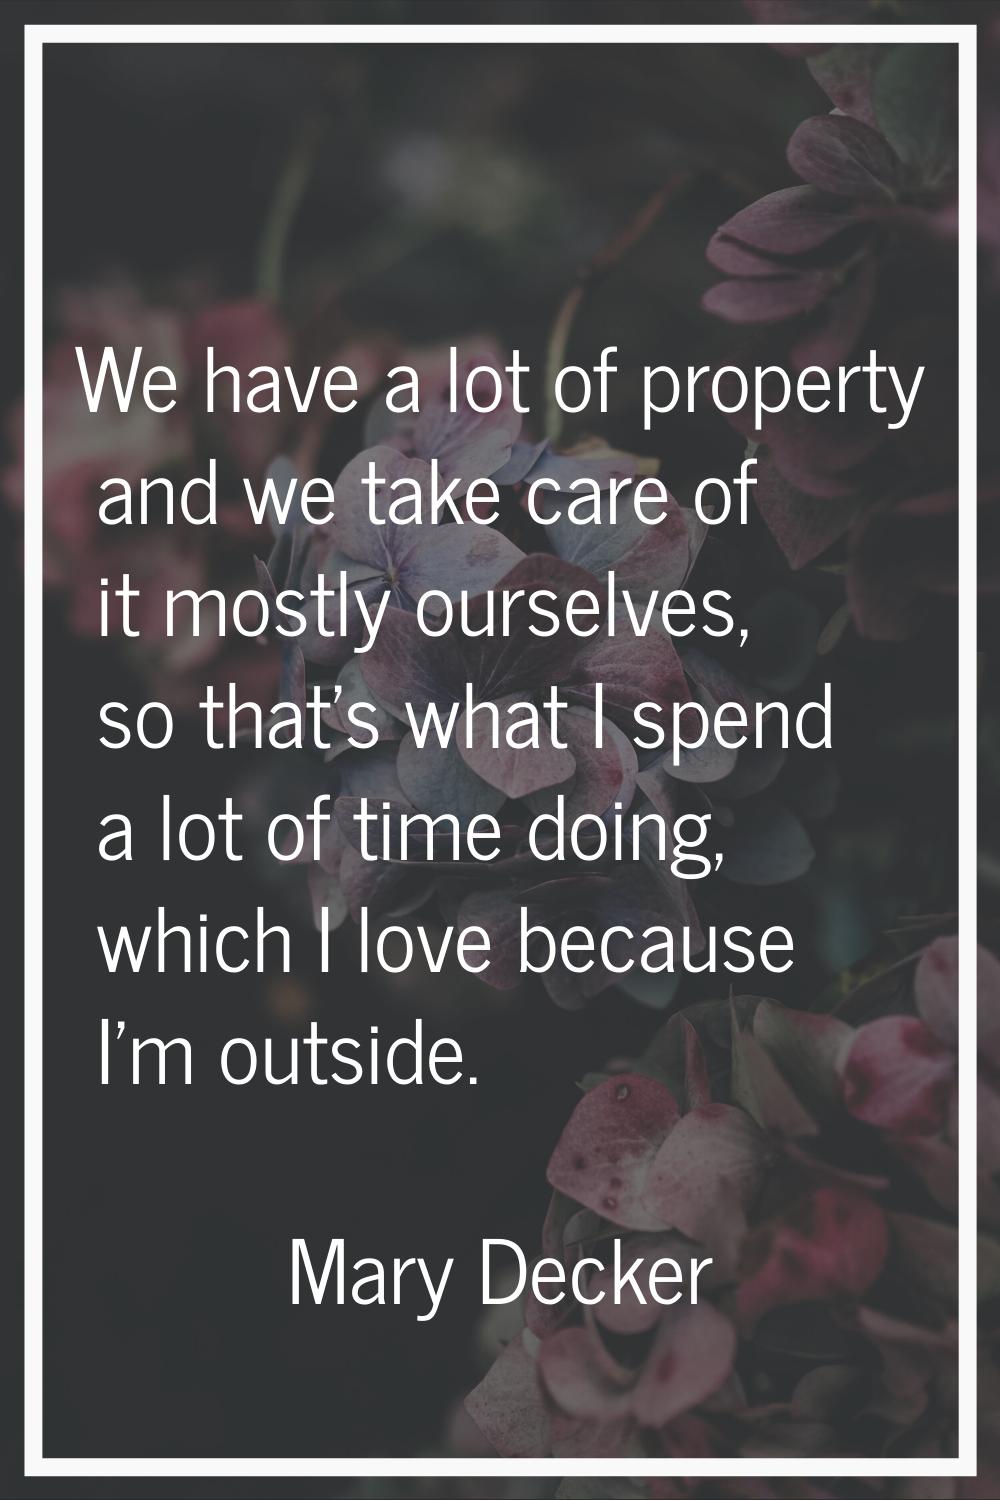 We have a lot of property and we take care of it mostly ourselves, so that's what I spend a lot of 